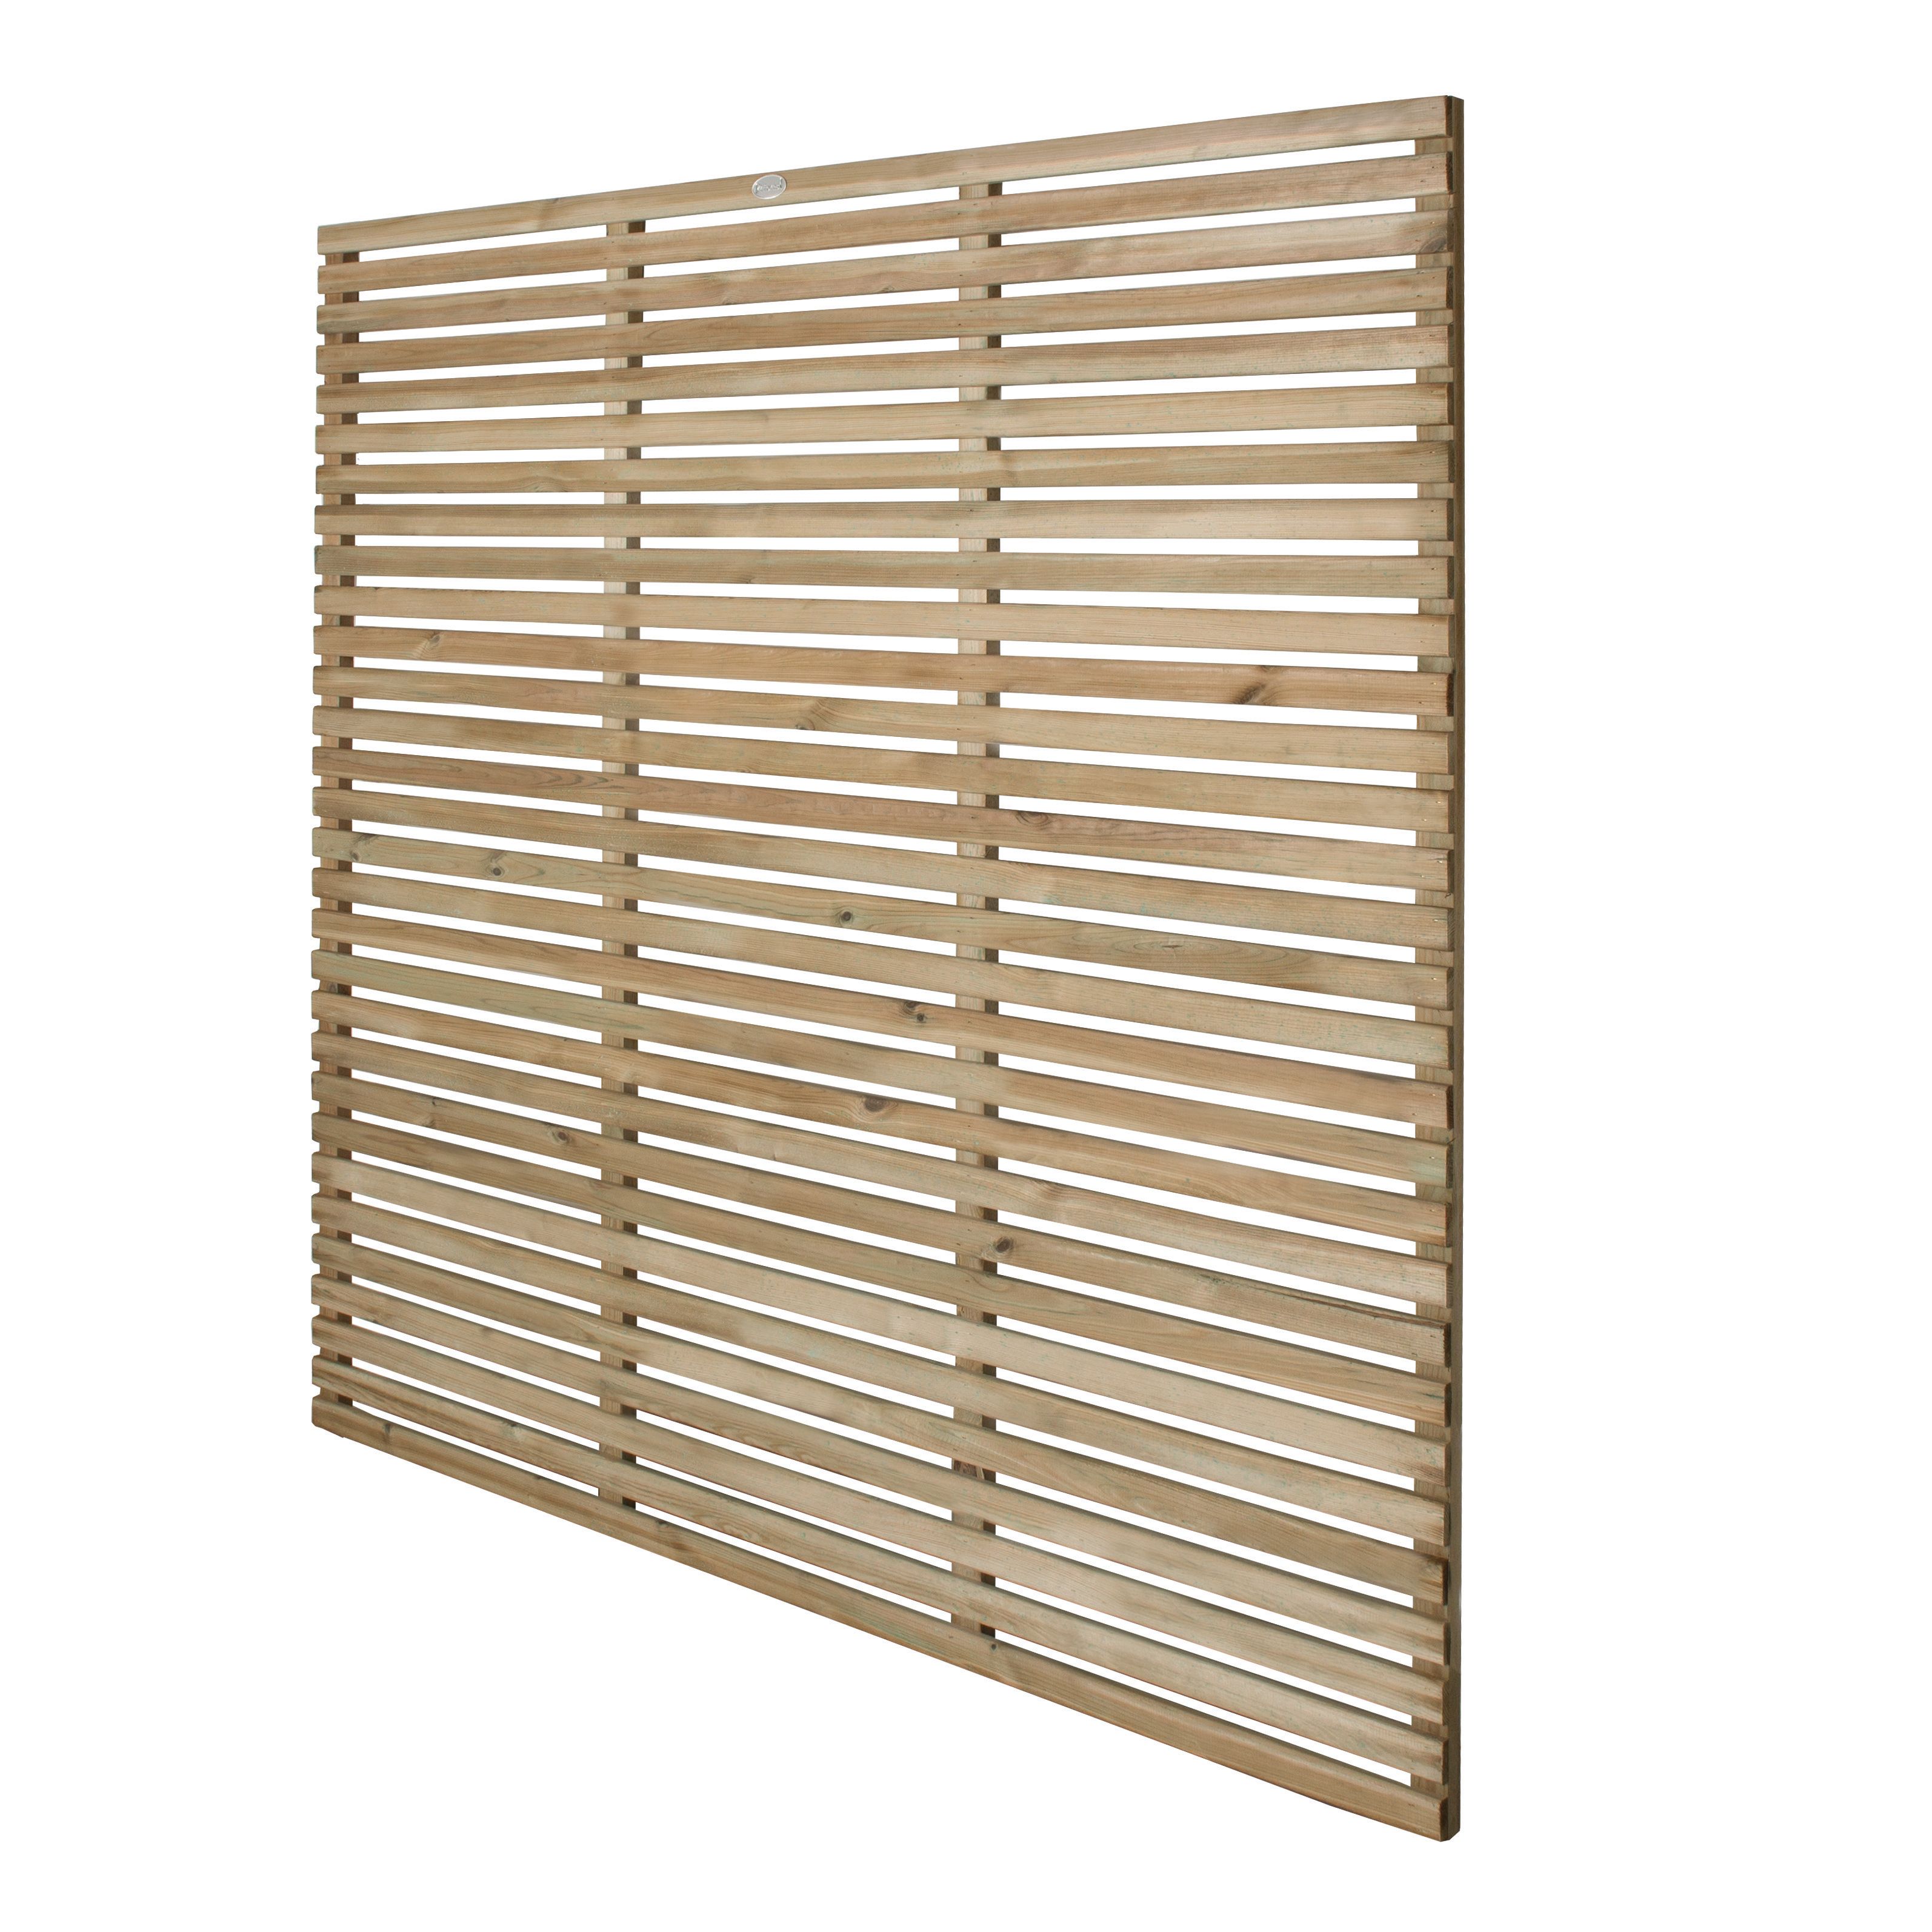 Image of Forest Garden Contemporary Single Slatted Fence Panel - 1800 x 1800mm - 6 x 6ft - Pack of 3